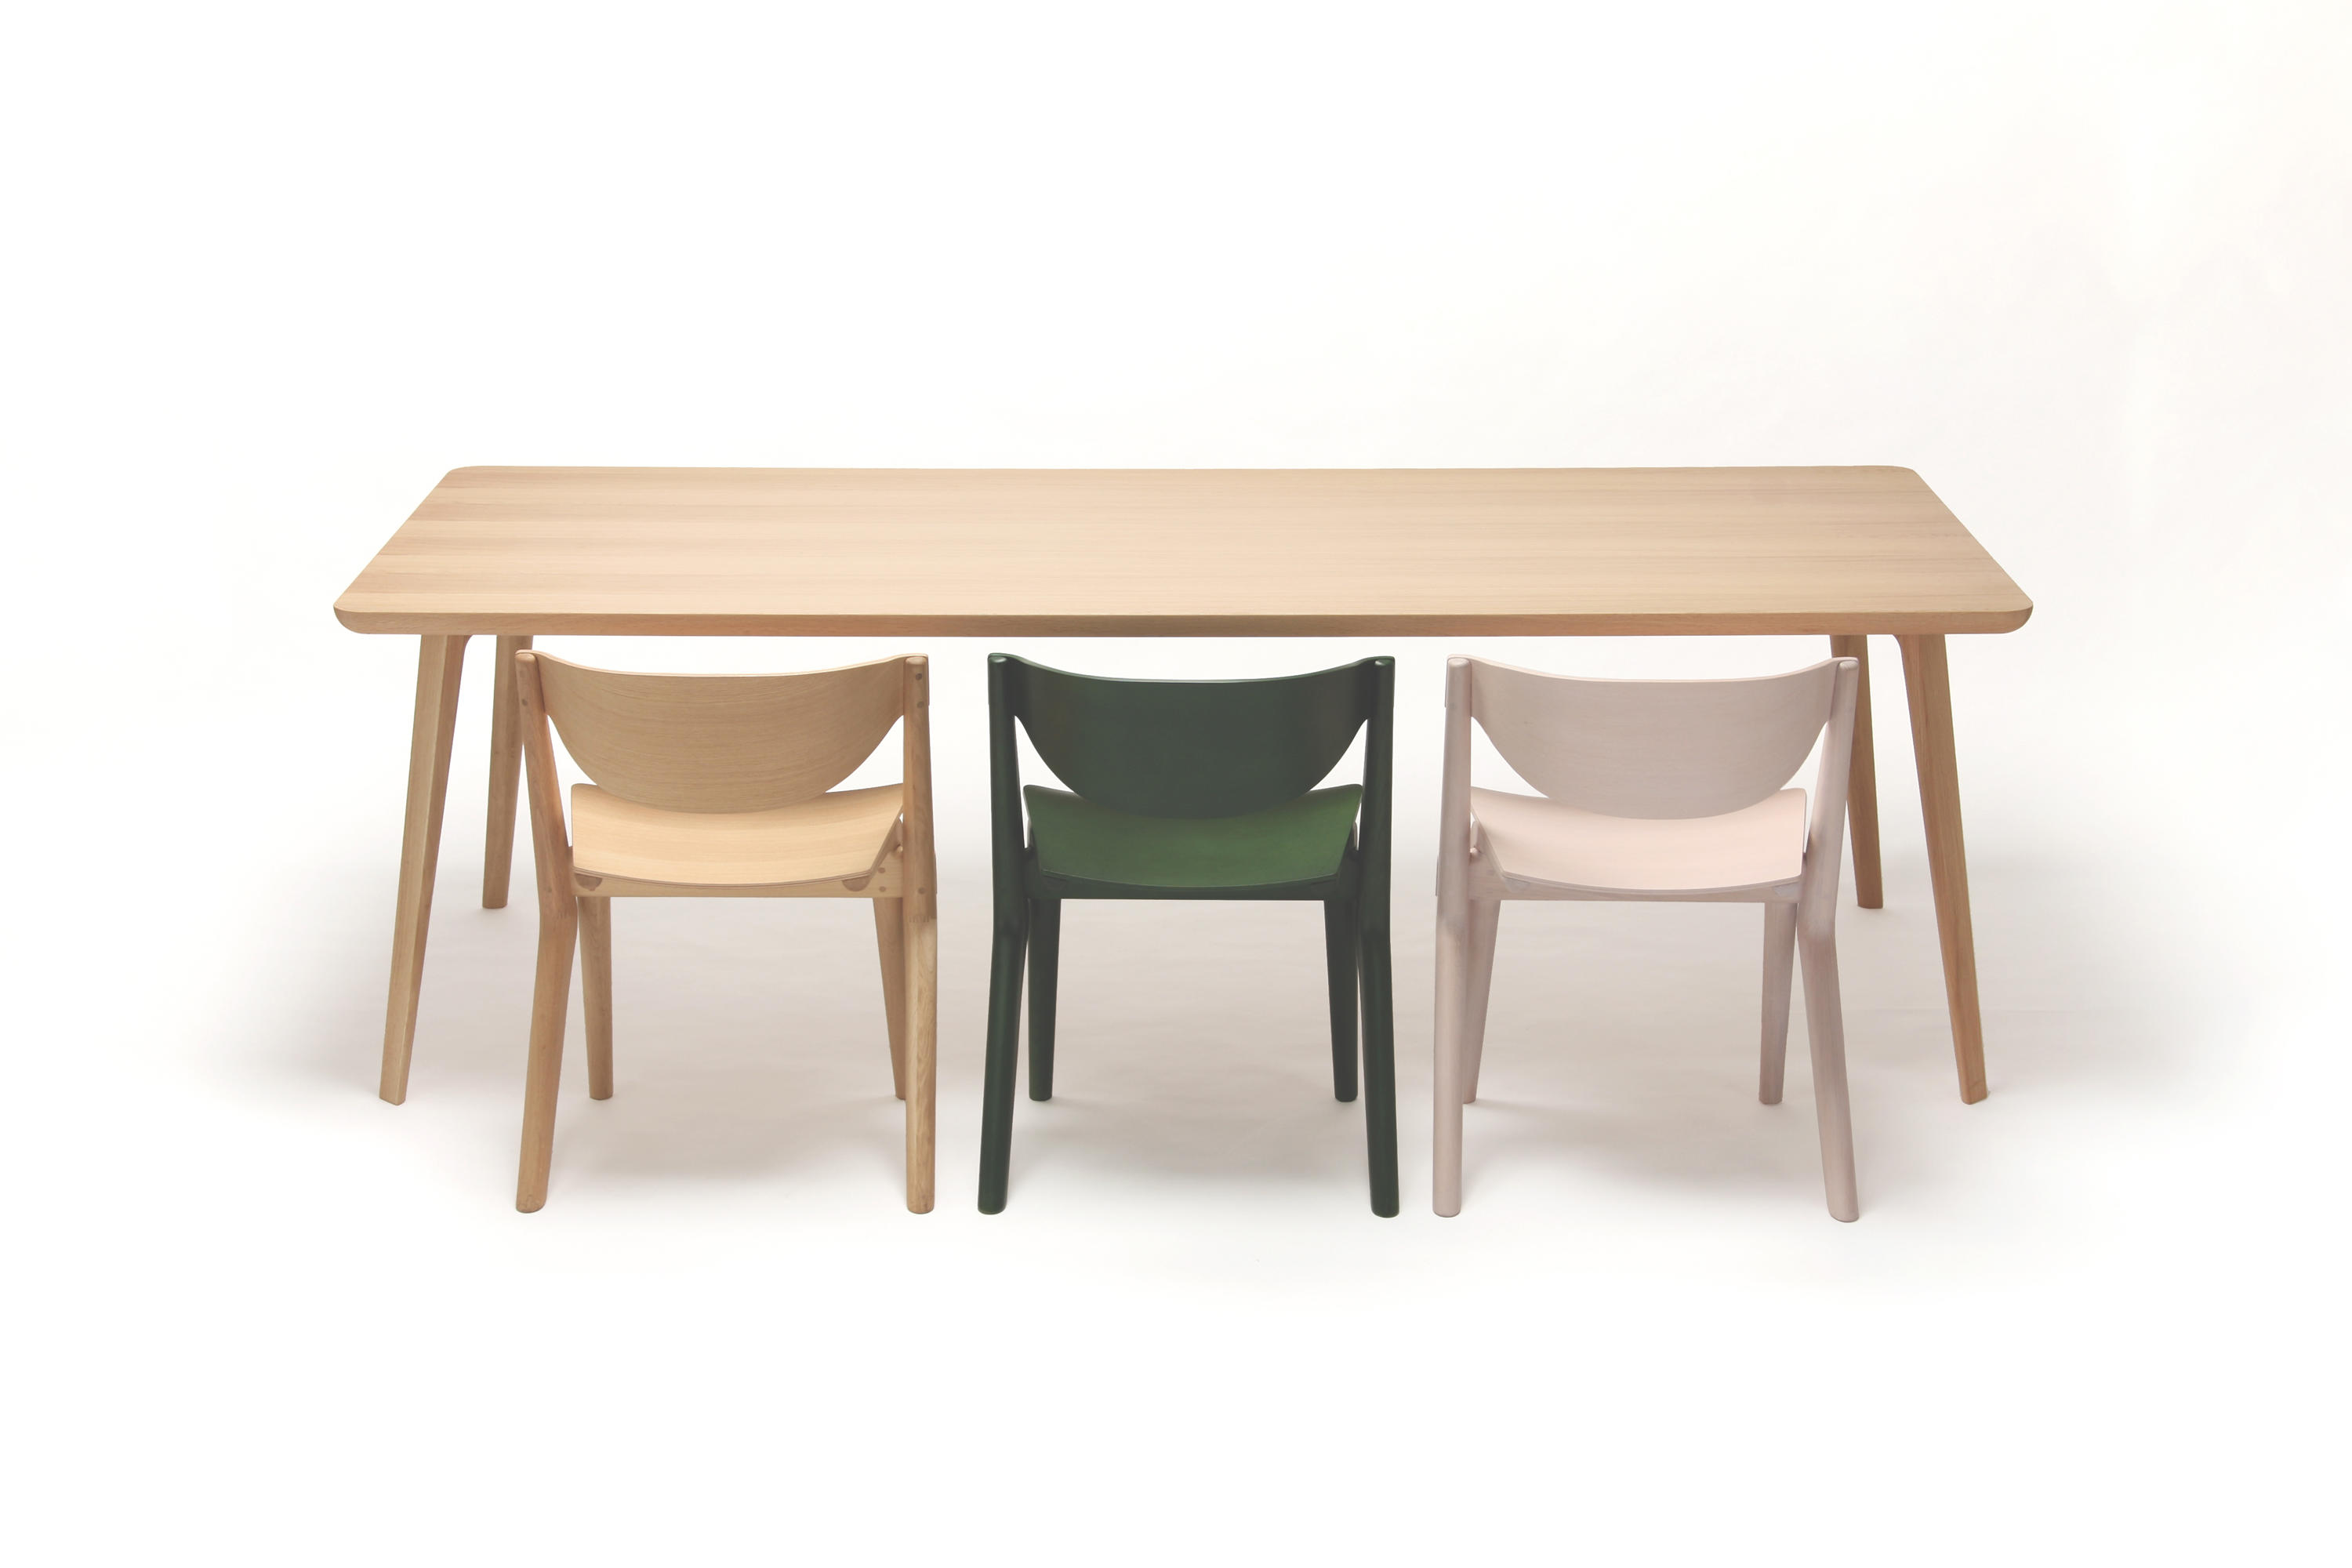 Scout Table 240 & designer furniture | Architonic